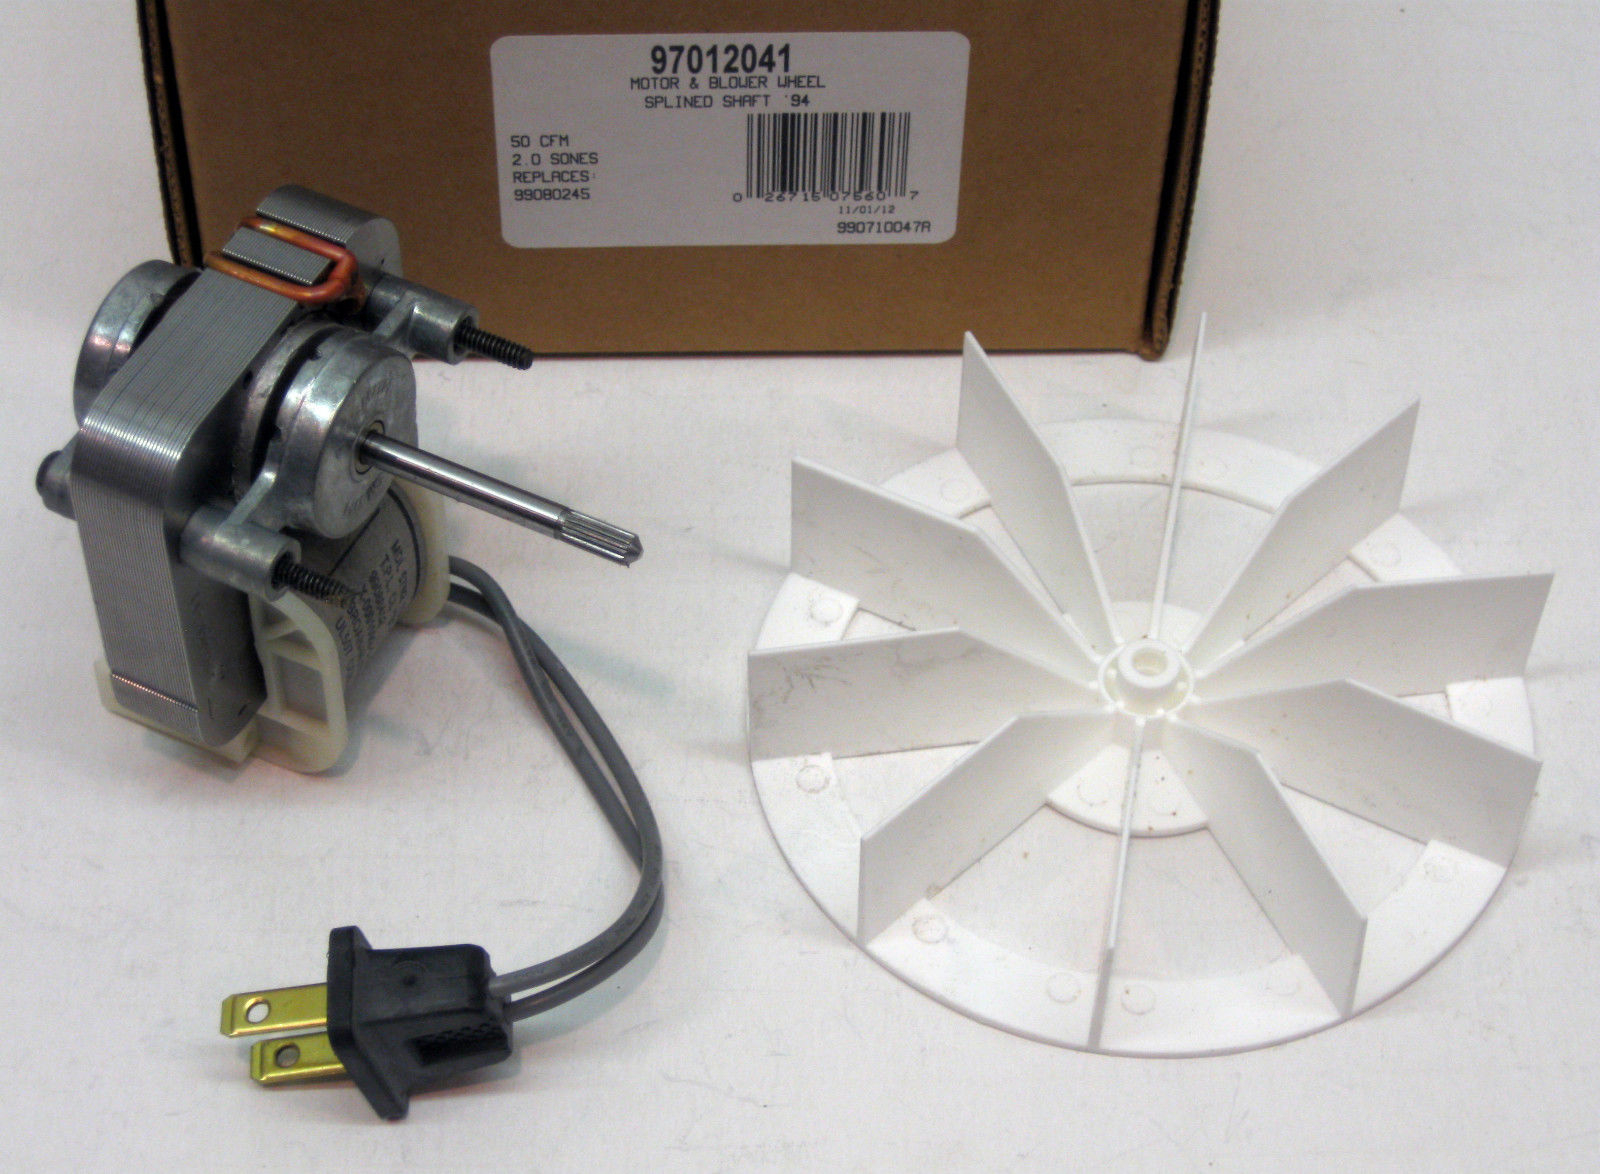 Broan Bathroom Fan Replacement Motor Image Of Bathroom And within size 1600 X 1174